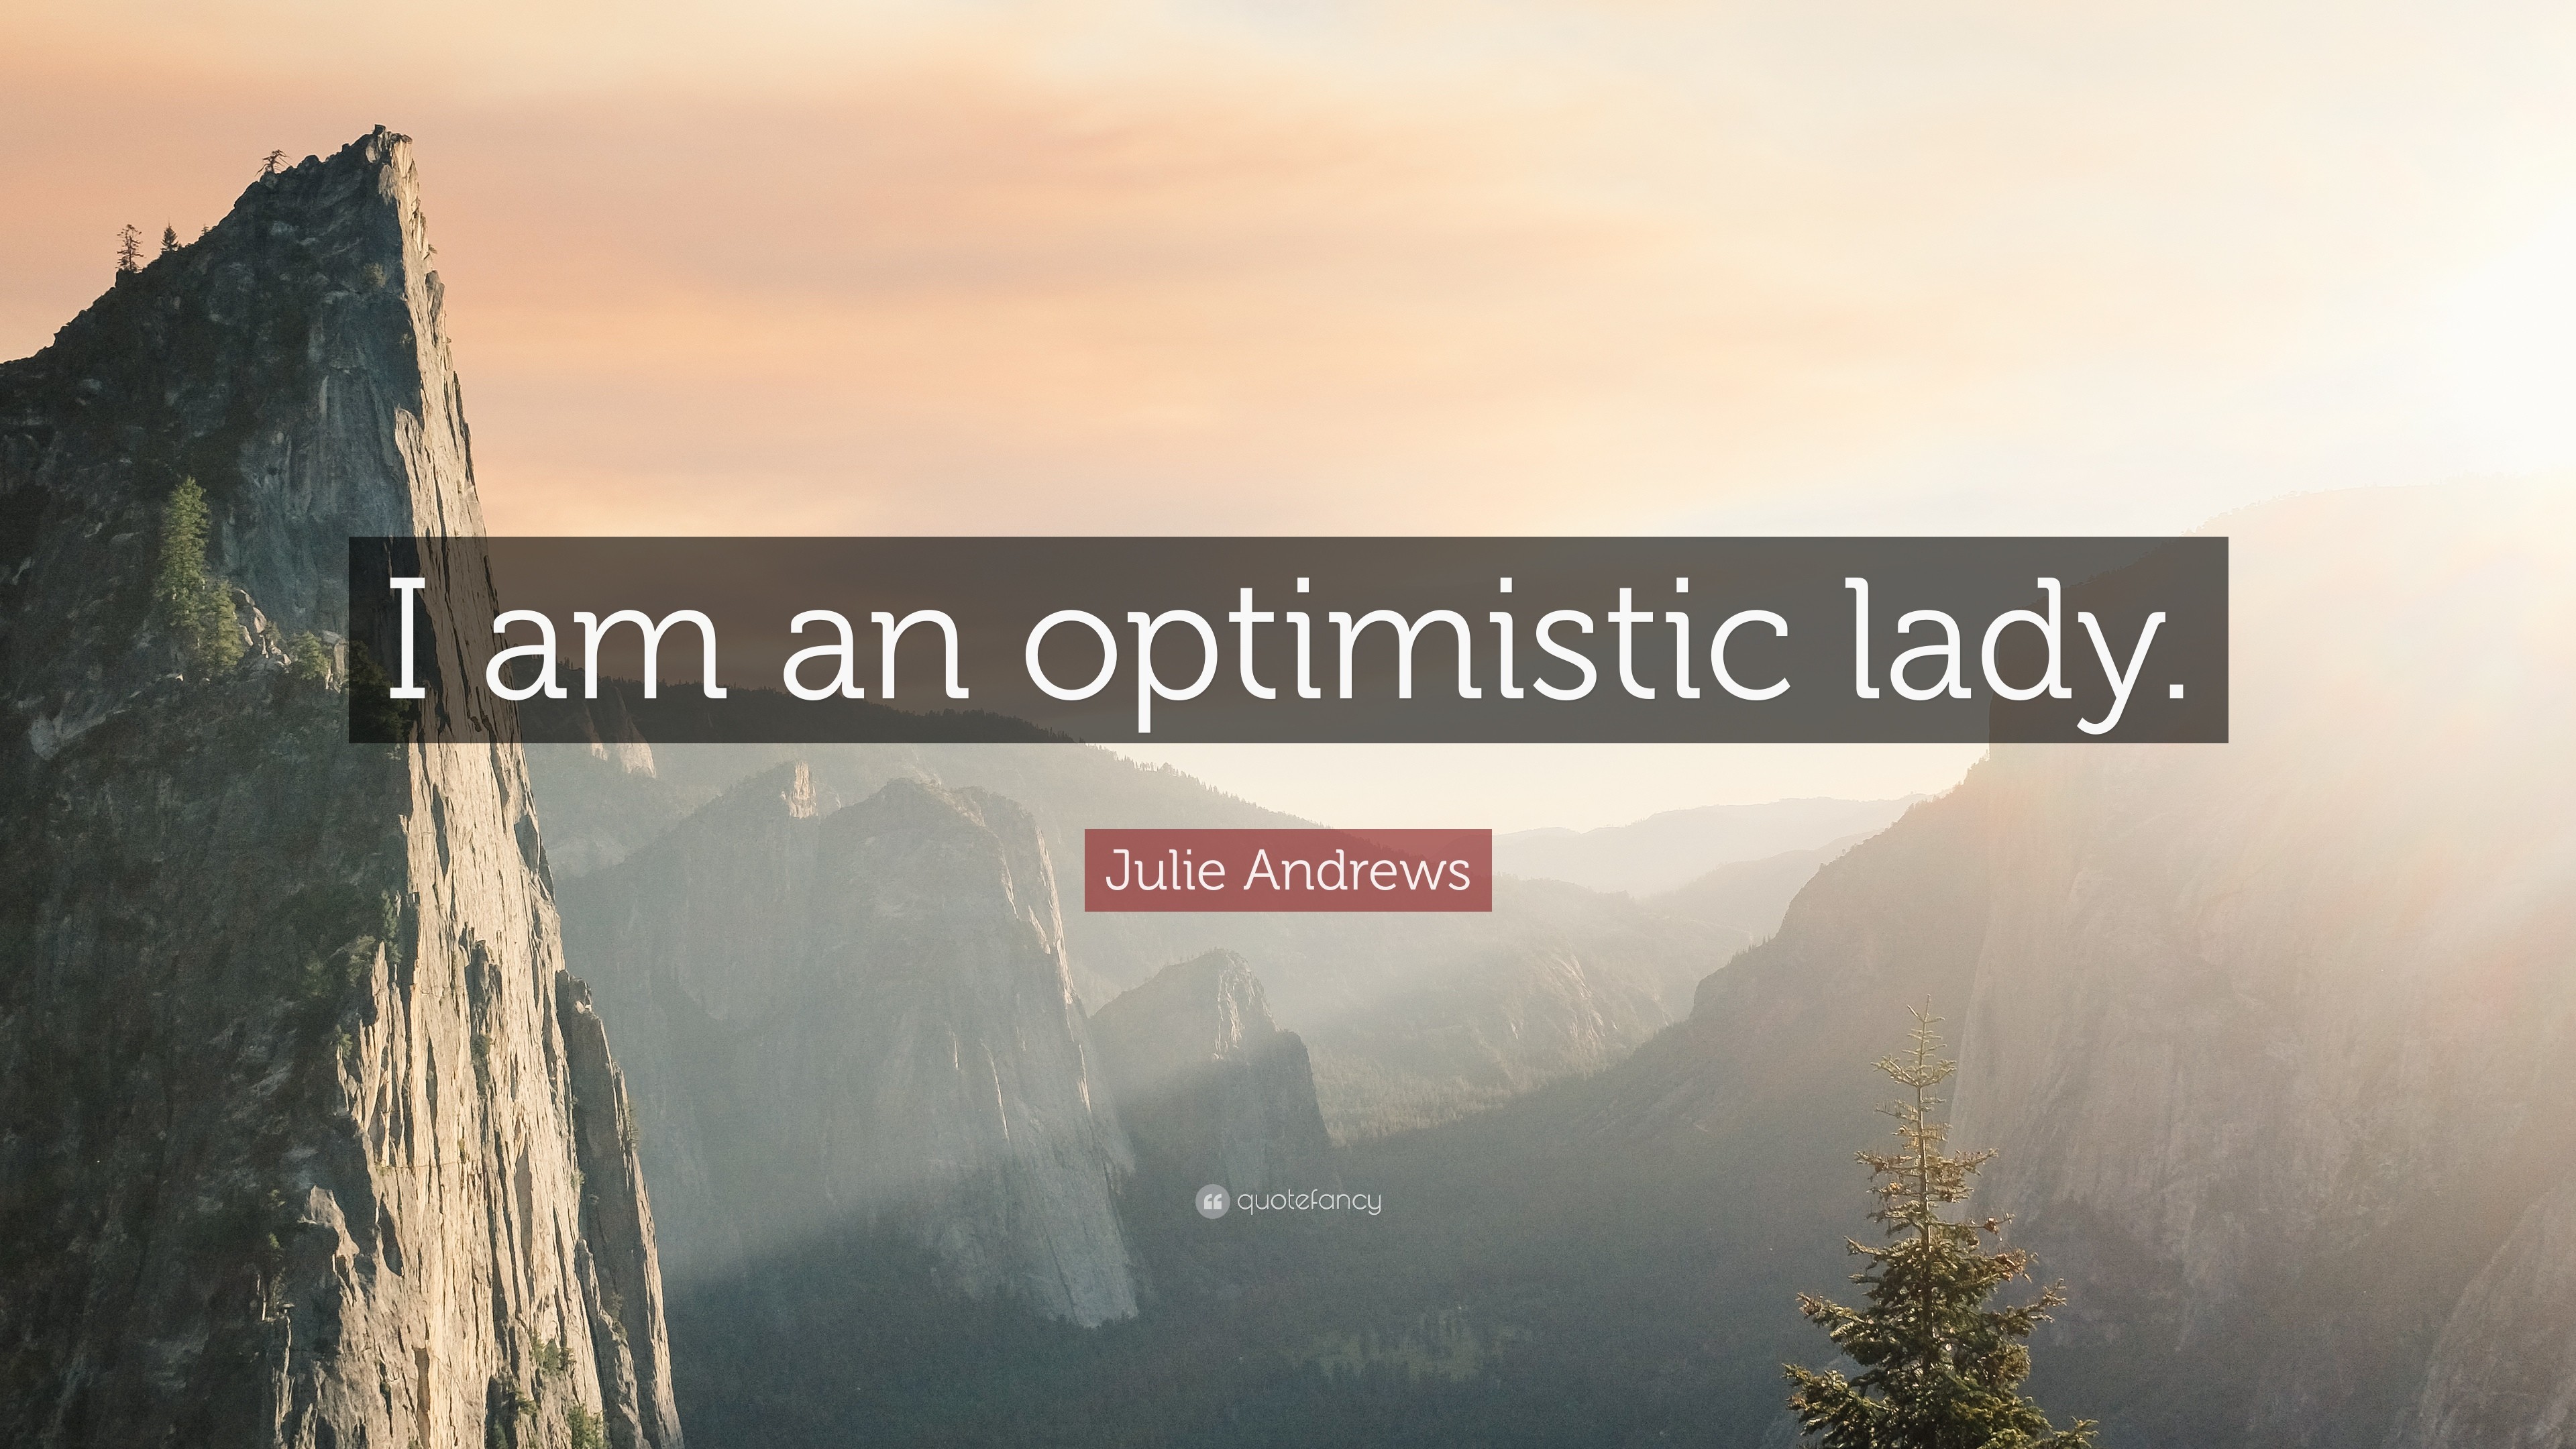 3840x2160 Julie Andrews Quote: “I am an optimistic lady.”